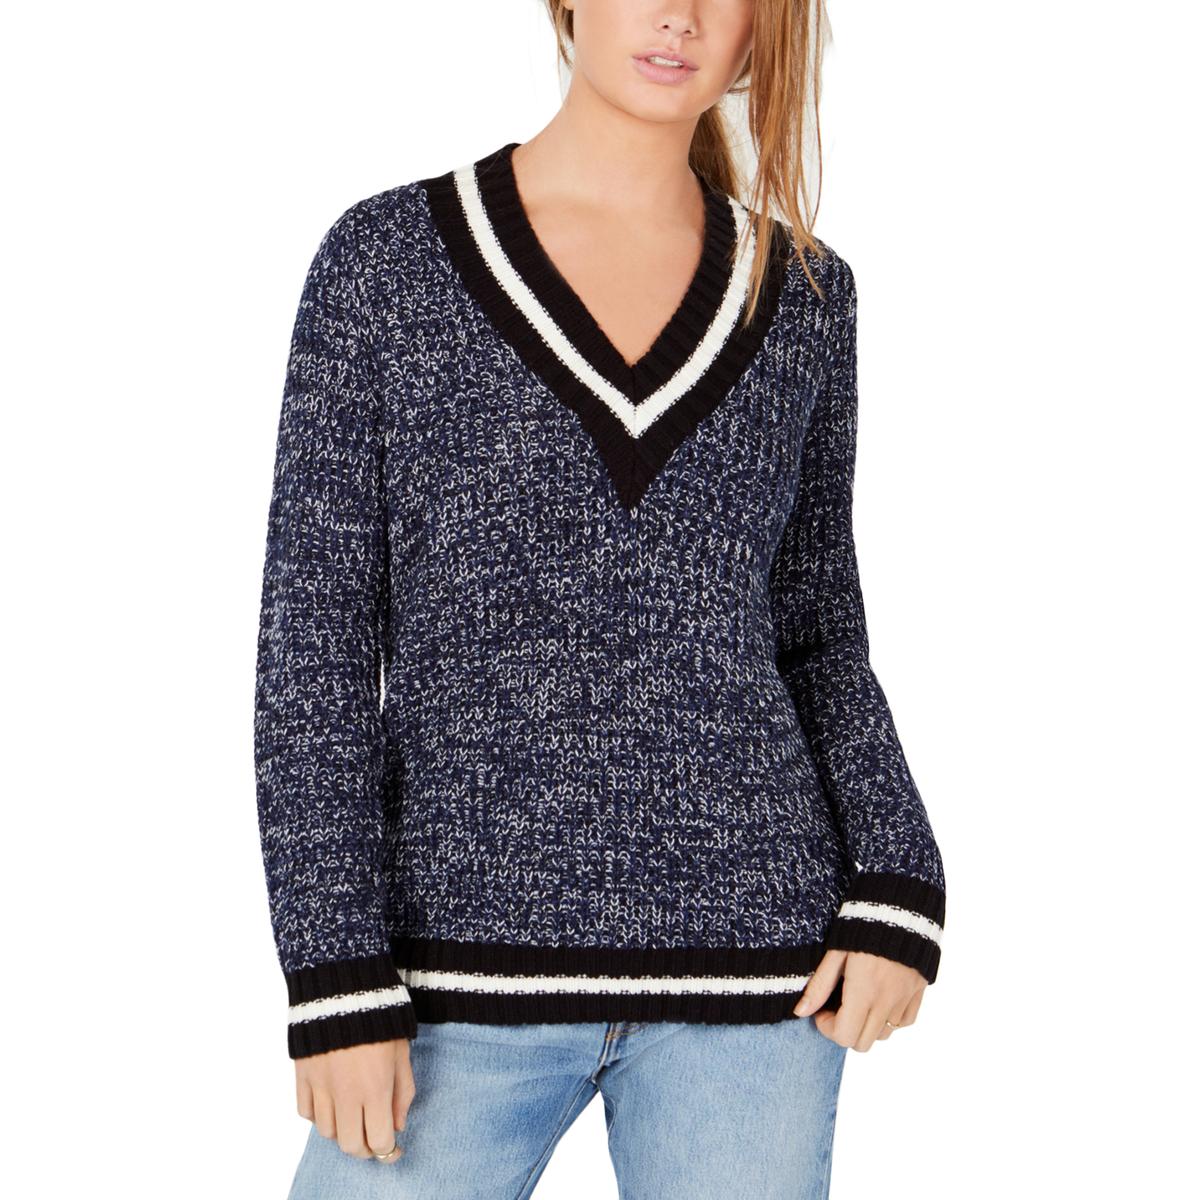 Freshman Womens Blue Knit Marled V-Neck Pullover Sweater Top M BHFO ...